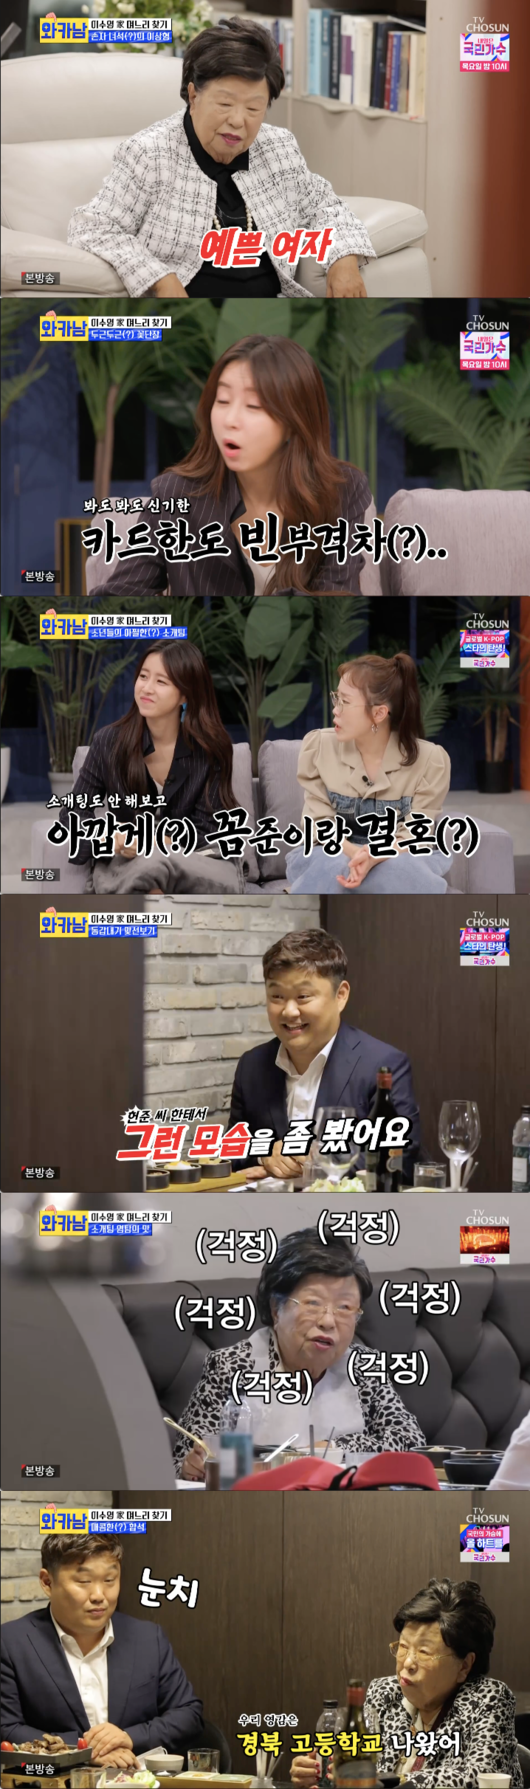 Wife Card Writing Man Chairman Lee Soo-young has appeared in the Grandchildren Sun.In the 15th episode of TV Chosun Man Writing Wife Card (hereinafter referred to as wakanam), which was broadcast on the afternoon of the 12th, the project to send Grandchildren marriage by Chairman Lee Soo-young was conducted while studying the Panic disorder that was caused by the near Corona 19 city government.Jung Jae-hoon, a psychiatrist, said, The prejudice of the 2030 generation (to consult with psychiatric counseling) has disappeared a lot.(The visitors) talk a lot about loneliness, anxiety about wheat, and the scars from the relationship, he explained.Park Myeong-su, who heard this, laughed, saying, Every time I think it is my special feature. Lee Hye-jae said, Today, I think there will be something that I and Jae-hwan have a lot of.I started analyzing the psychological tendencies by looking at the trees, houses, and peoples pictures of the cast.When I saw Park Myeong-sus painting, Jung Jae-hoon specialist said, It is a narcissist tendency.The second picture shows, I shot a person with a pair. It feels like a person without a look.It is 100 points for others. Kim Sang-joon, who painted the picture, laughed when he said, Stop. It is more like a tendency to be there for a long time than a temporary tendency, the specialist added.When I saw the next picture, I said, I should be at the center and get the spotlight, and Hong Hyun-hee said, I painted it.Lee Soo-young, chairman of the Grandchildren Hunjun, has entered the market.On the day of the line, Lee Soo-young and Grandchildren Hunjun came to the hair shop to do their hair.Lee Soo-young, chairman of the company, also gave Grandchildren Hunjun a 100 million card.She was introduced to me as a lawyer, and she said, Ideal is a tree-like person. I like her for her inclusiveness. (Mr. Hun Jun) looked good.I never thought Id see you like this.Lee Soo-young, chairman of the board of directors Lee Soo-young, came to the place where Mr. Hunjun was blind dated. Lee Soo-young, chairman of the board of directors, laughed when he said, I should live well.On the other hand, when asked what is the ideal type of the confrontation, Hunjun said, I used to like a pretty woman, but now it seems to change.Lee Soo-young, chairman of the company, asked the woman, Are you afraid of me? And the woman said, I do not know if this is a shame, but it is cute.Lee Soo-young, chairman of the company, laughed when he said, I am cute because I grew up as my youngest daughter.the man who writes the Wife Card broadcast screen capture